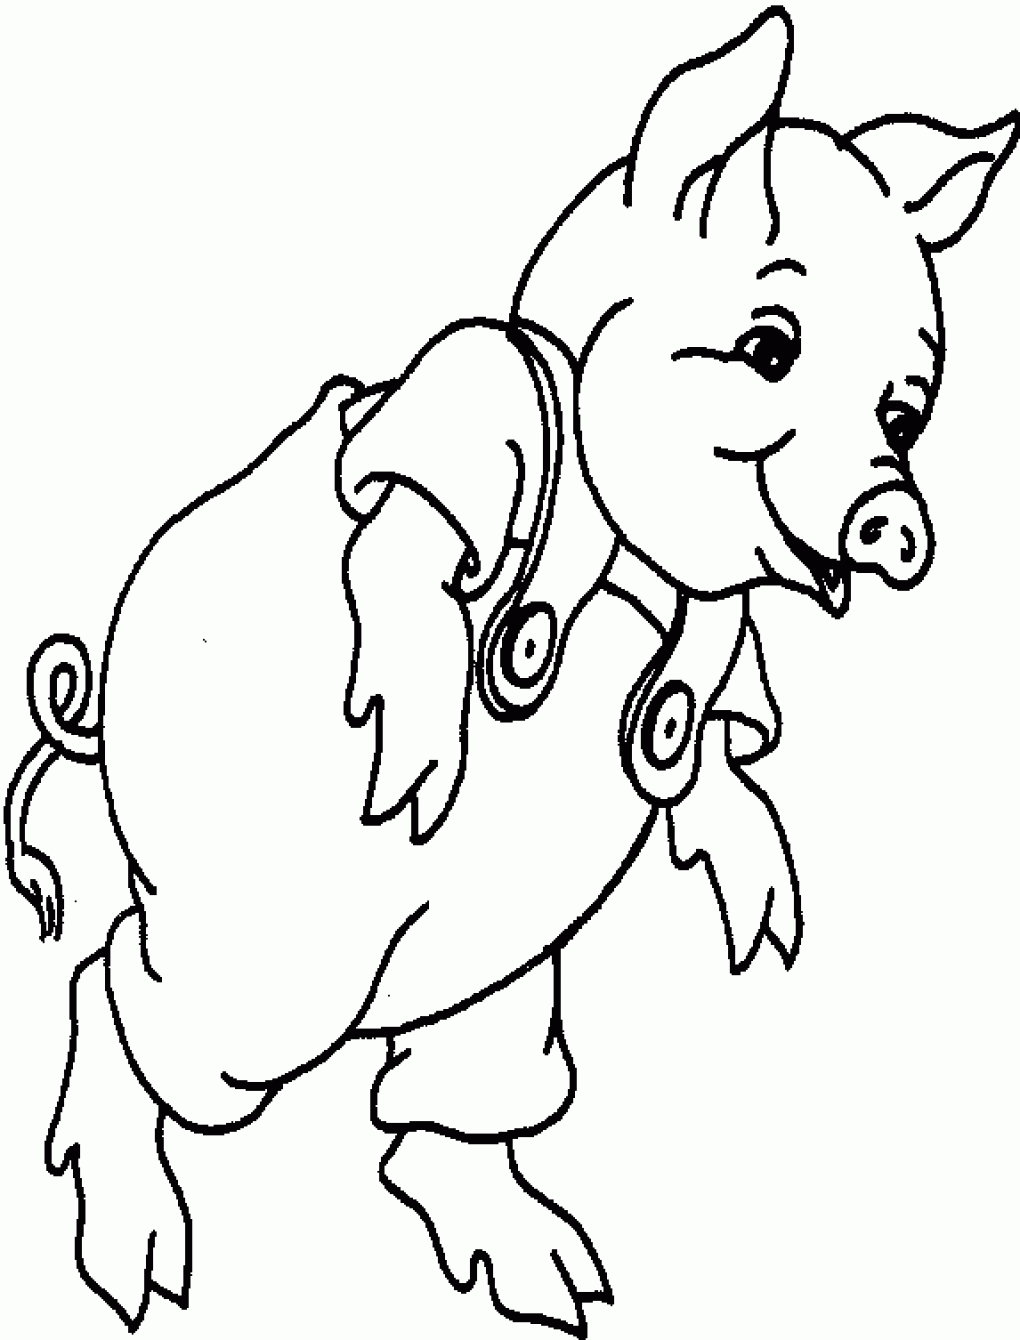 Piggy Printable Coloring Pages